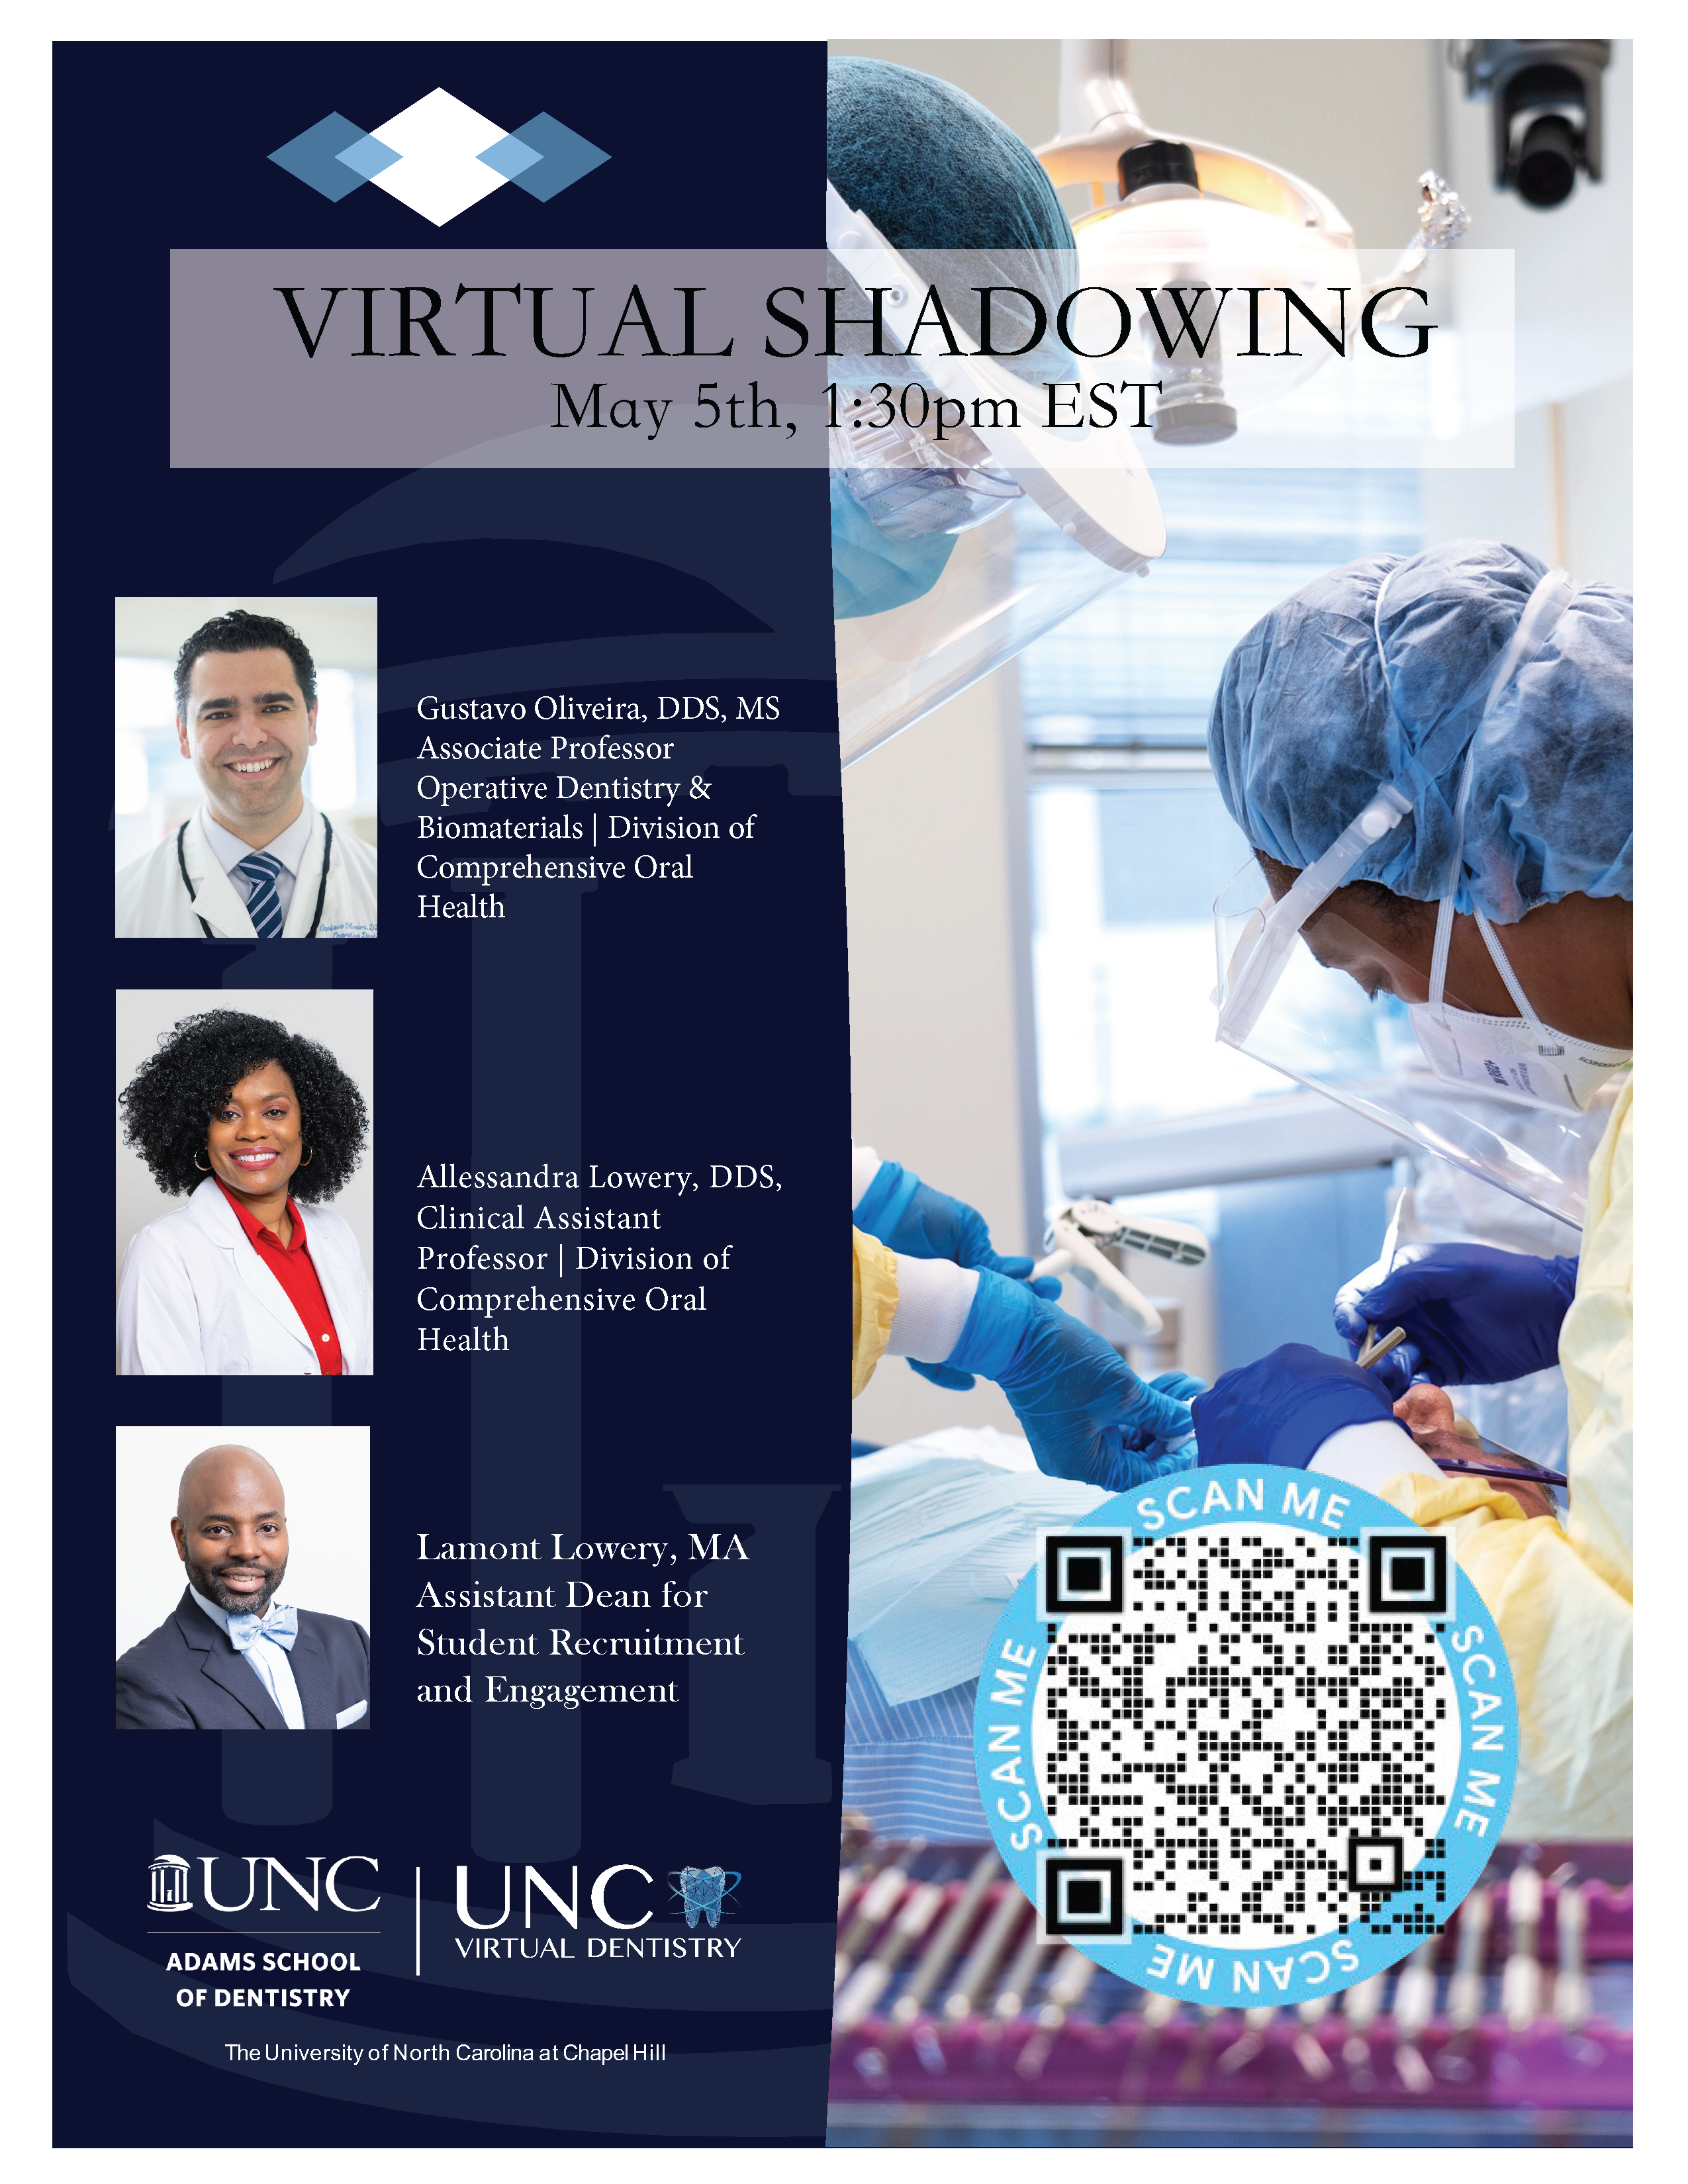 flyer for virtual shadowing event featuring an image of a dental procedure and the headshots of Dr. Oliveira, Dr. Lowery, and Assistant Dean Lamont Lowery